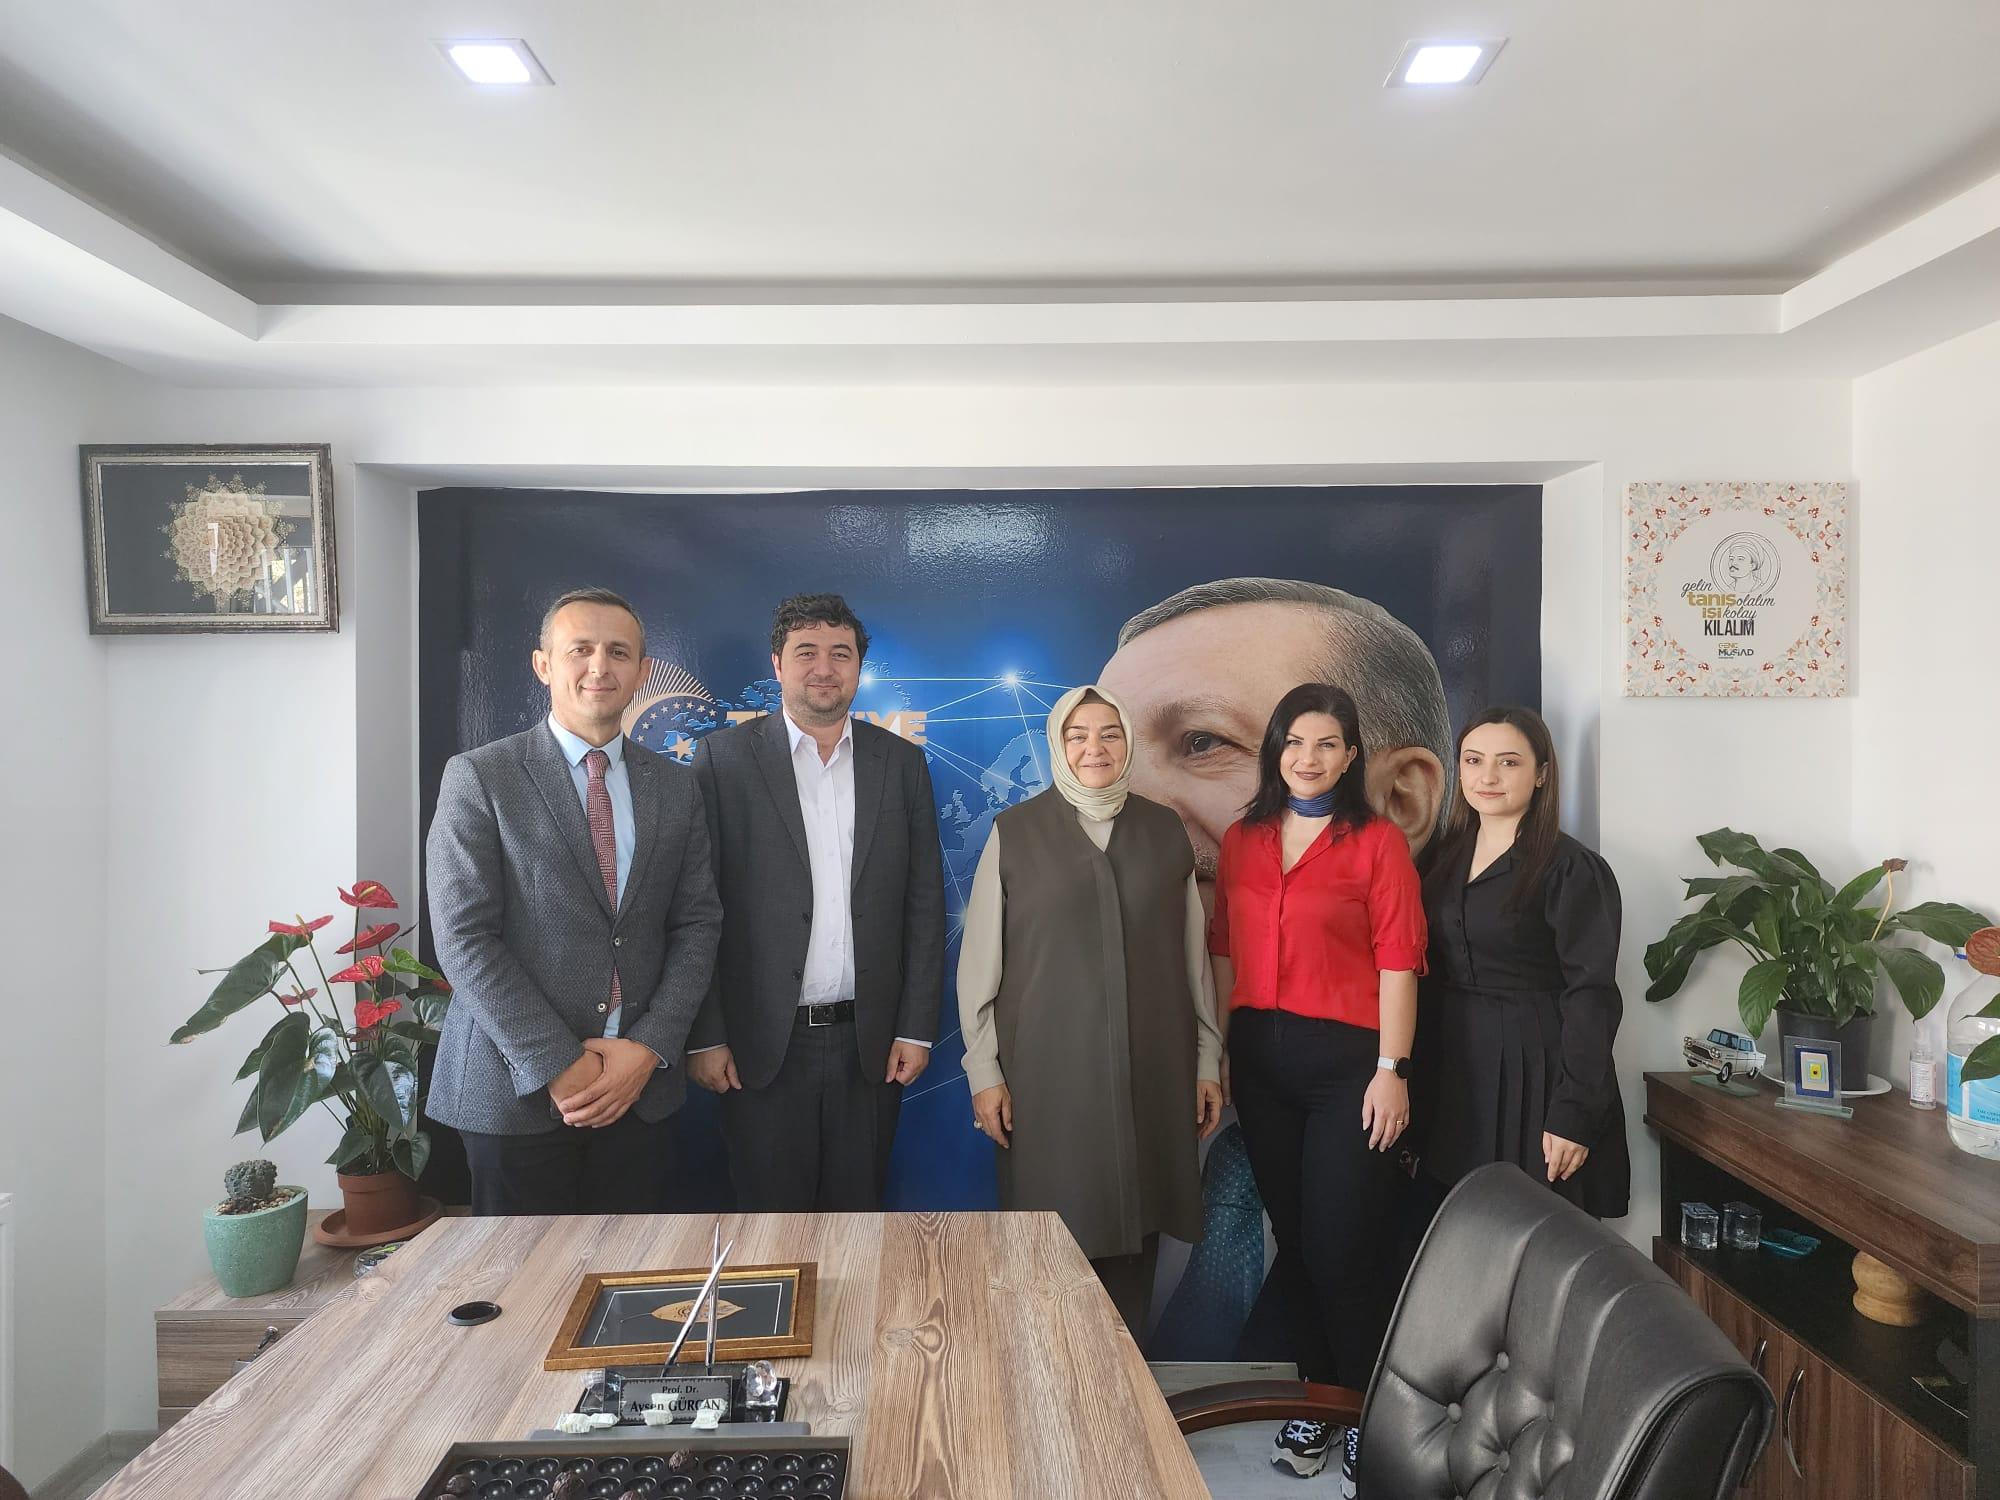 Our Chairman Serkan Ülkü, our Eskişehir Deputy and our 63rd Government Minister of Family and Social Services Prof. Dr. Visited Ayşen Gürcan